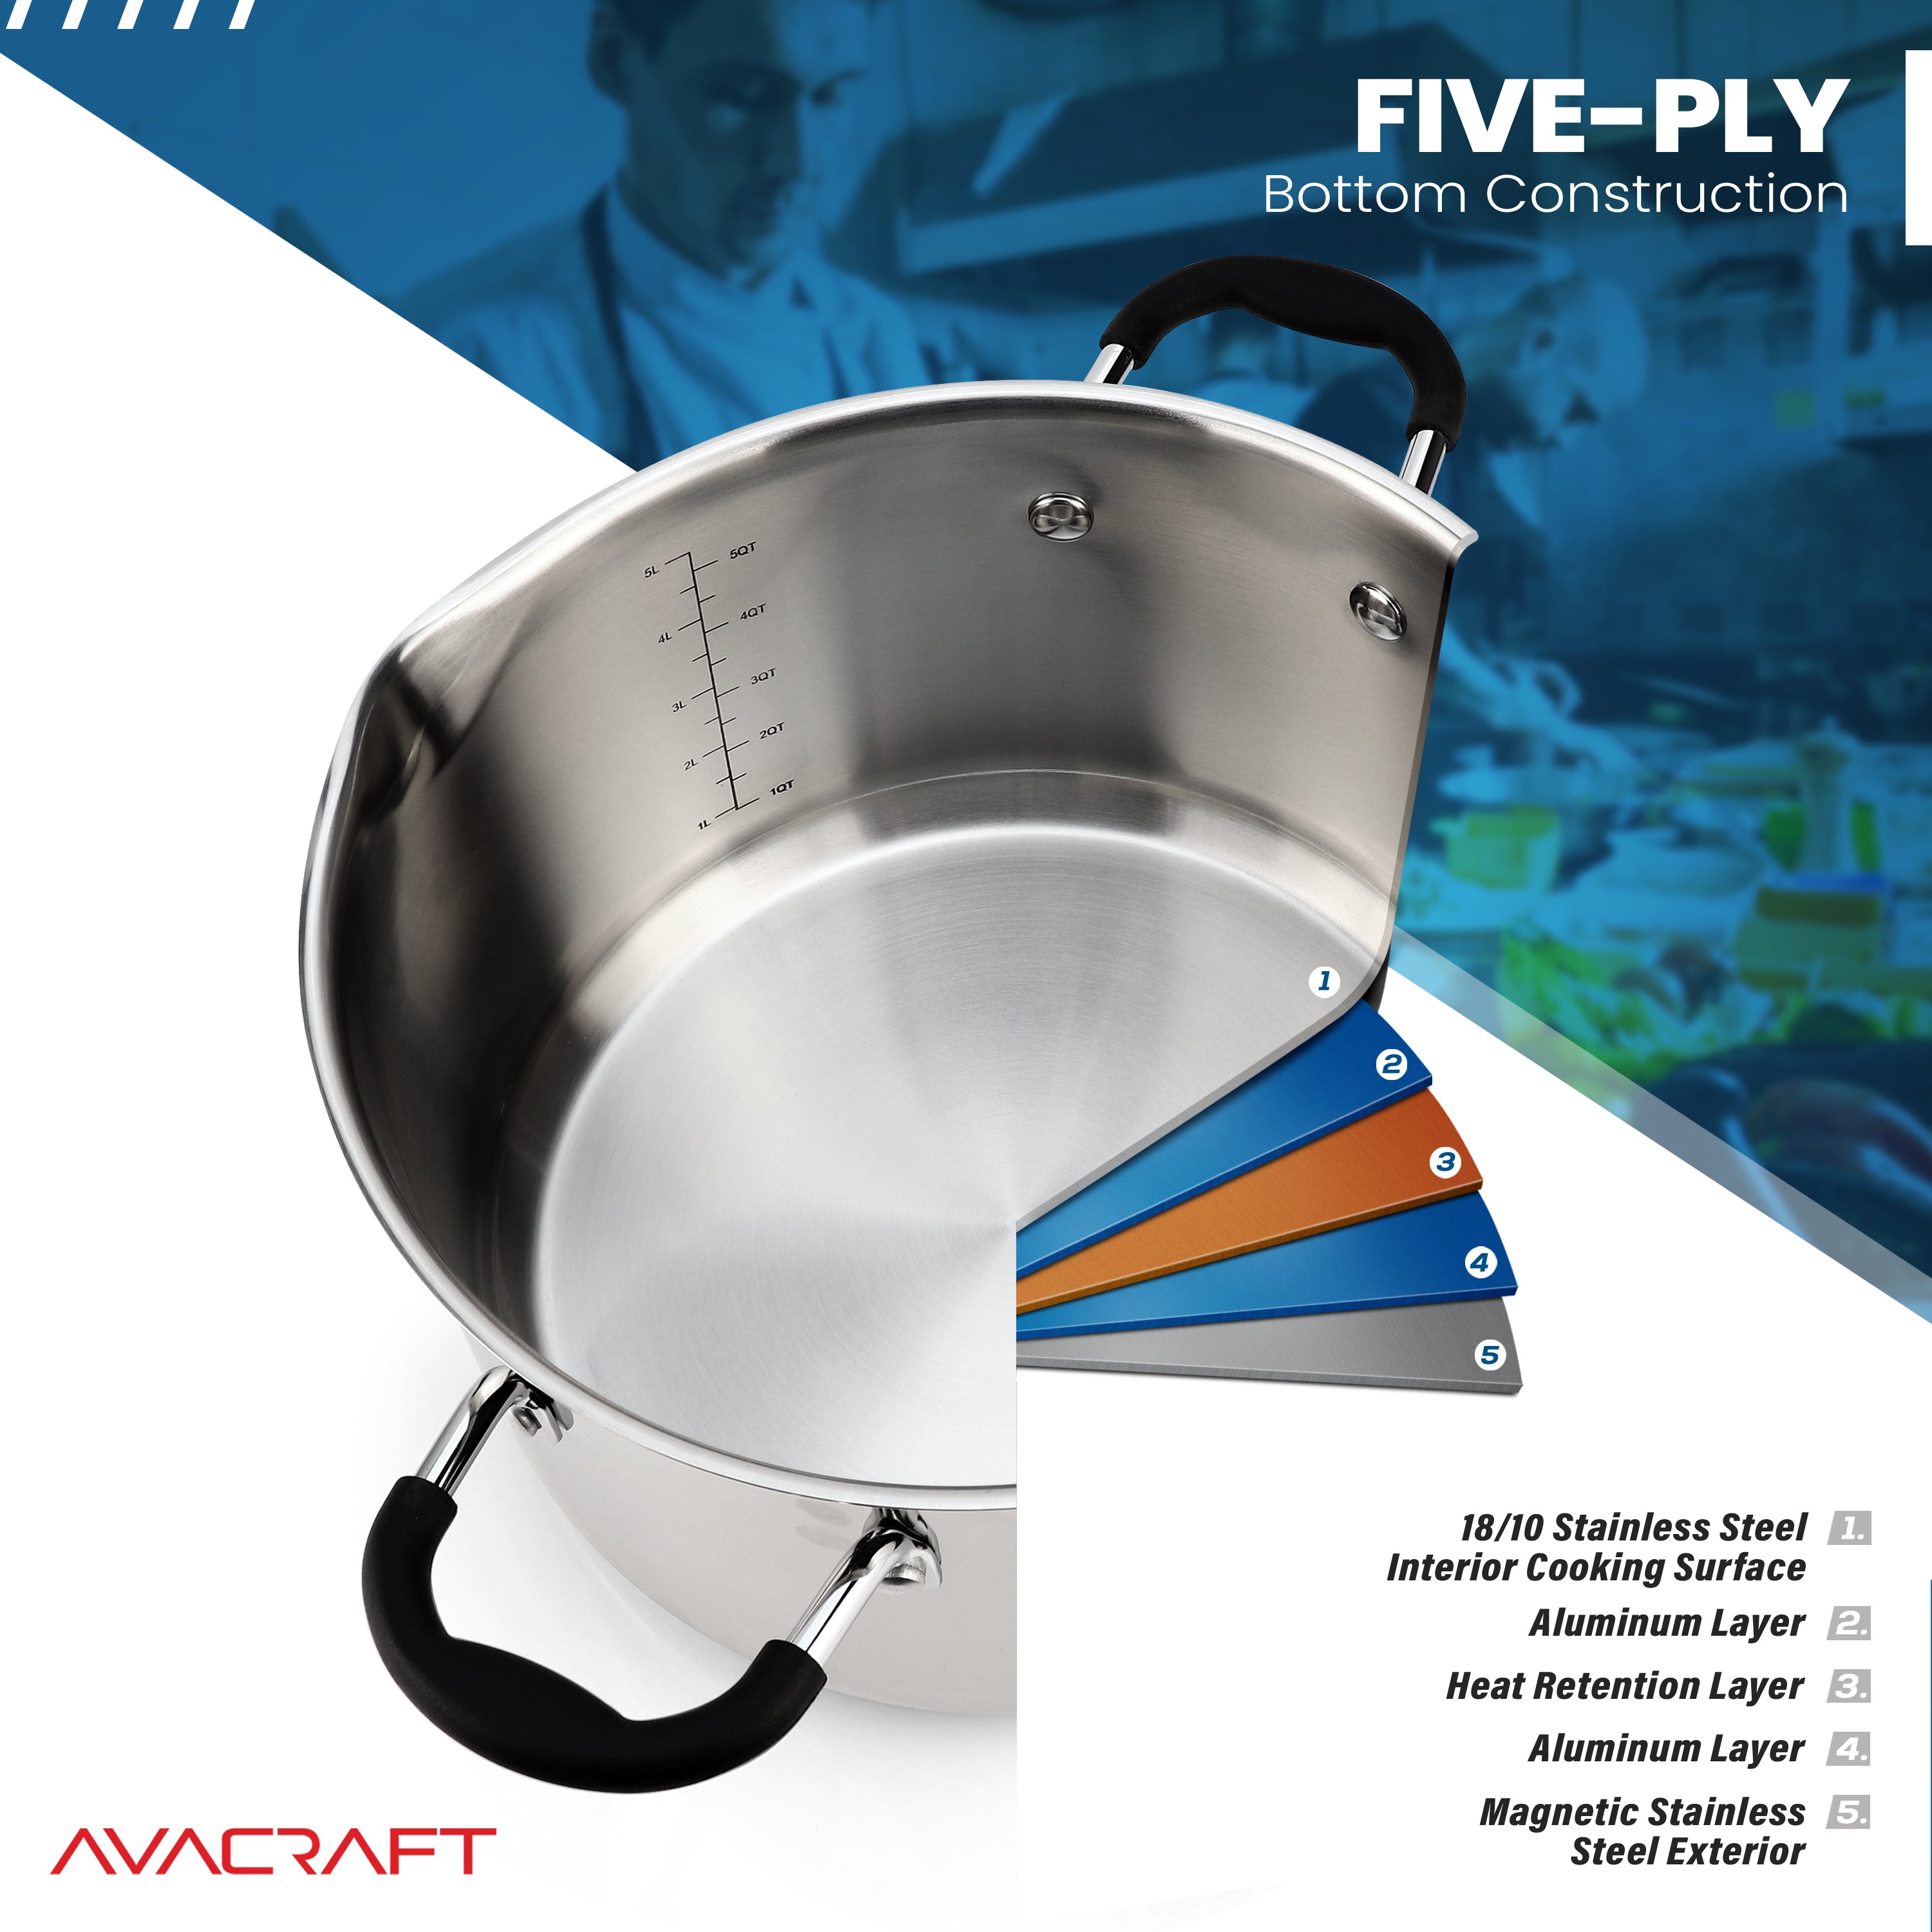 AVACRAFT Nonstick Saucepan with Glass Lid, Strainer Lid, 100% PTFE, PFOA Toxins Free, Two Side Spouts for Easy Pour, Multipurpose Sauce Pan with Lid